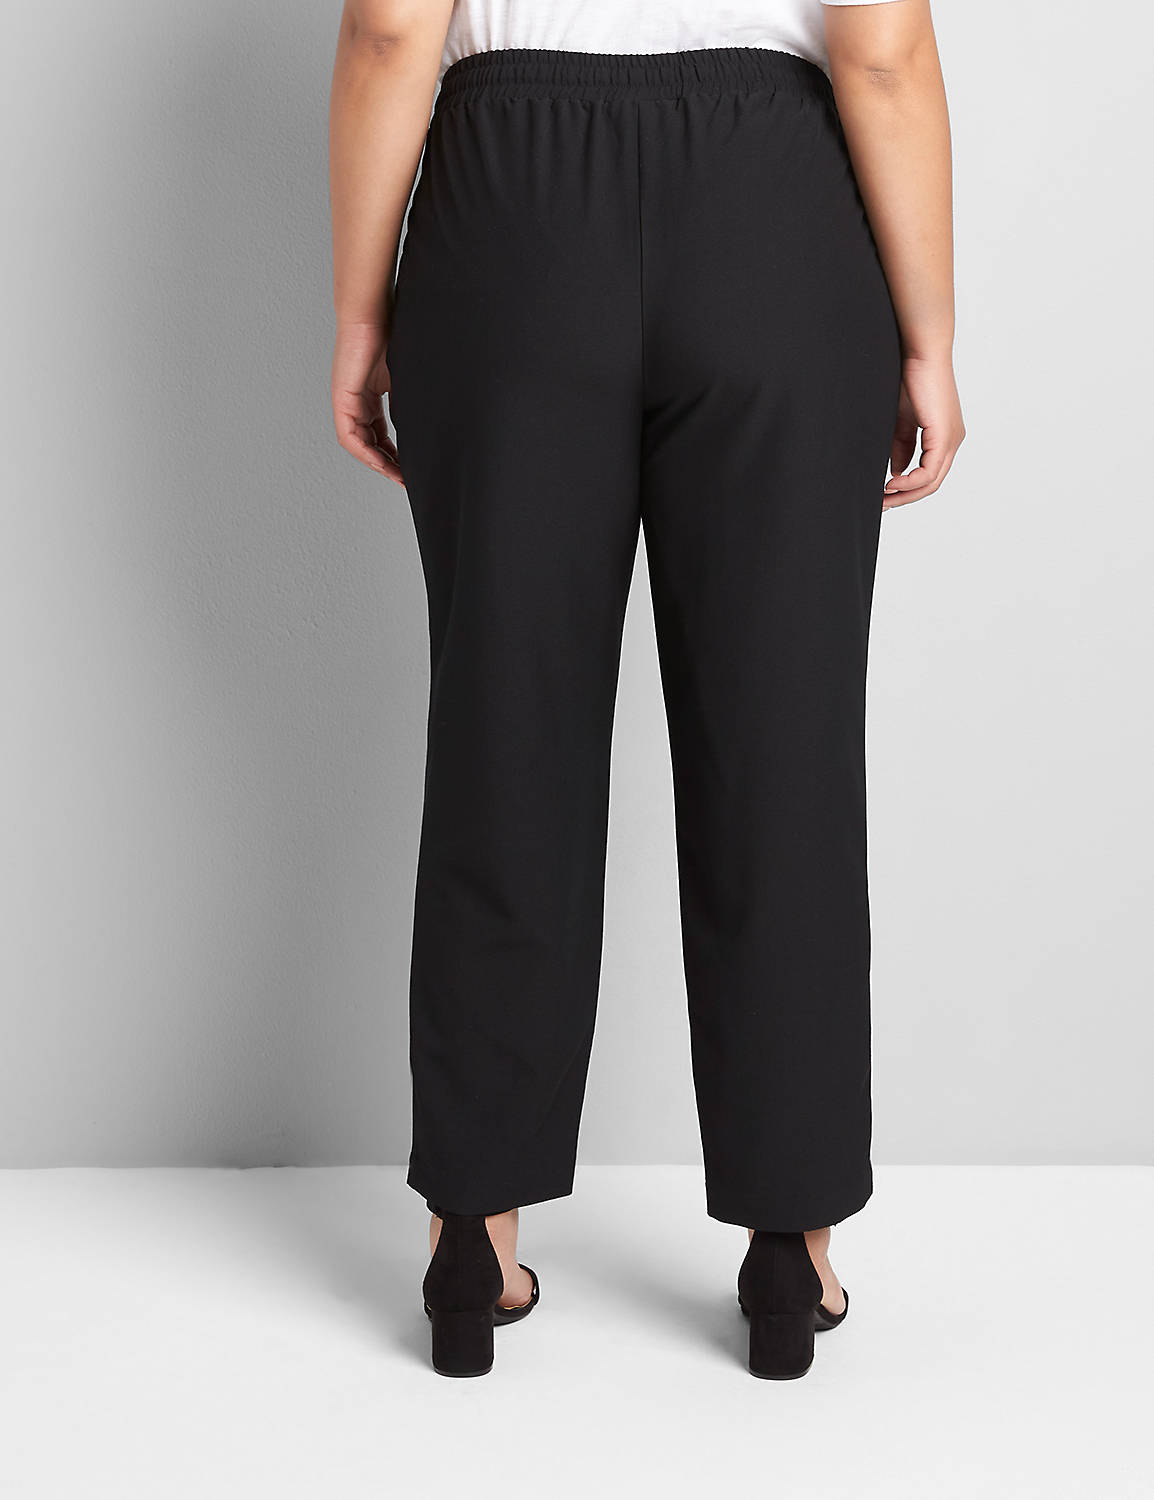 Pull-on Ankle Pant 1120266 Product Image 2